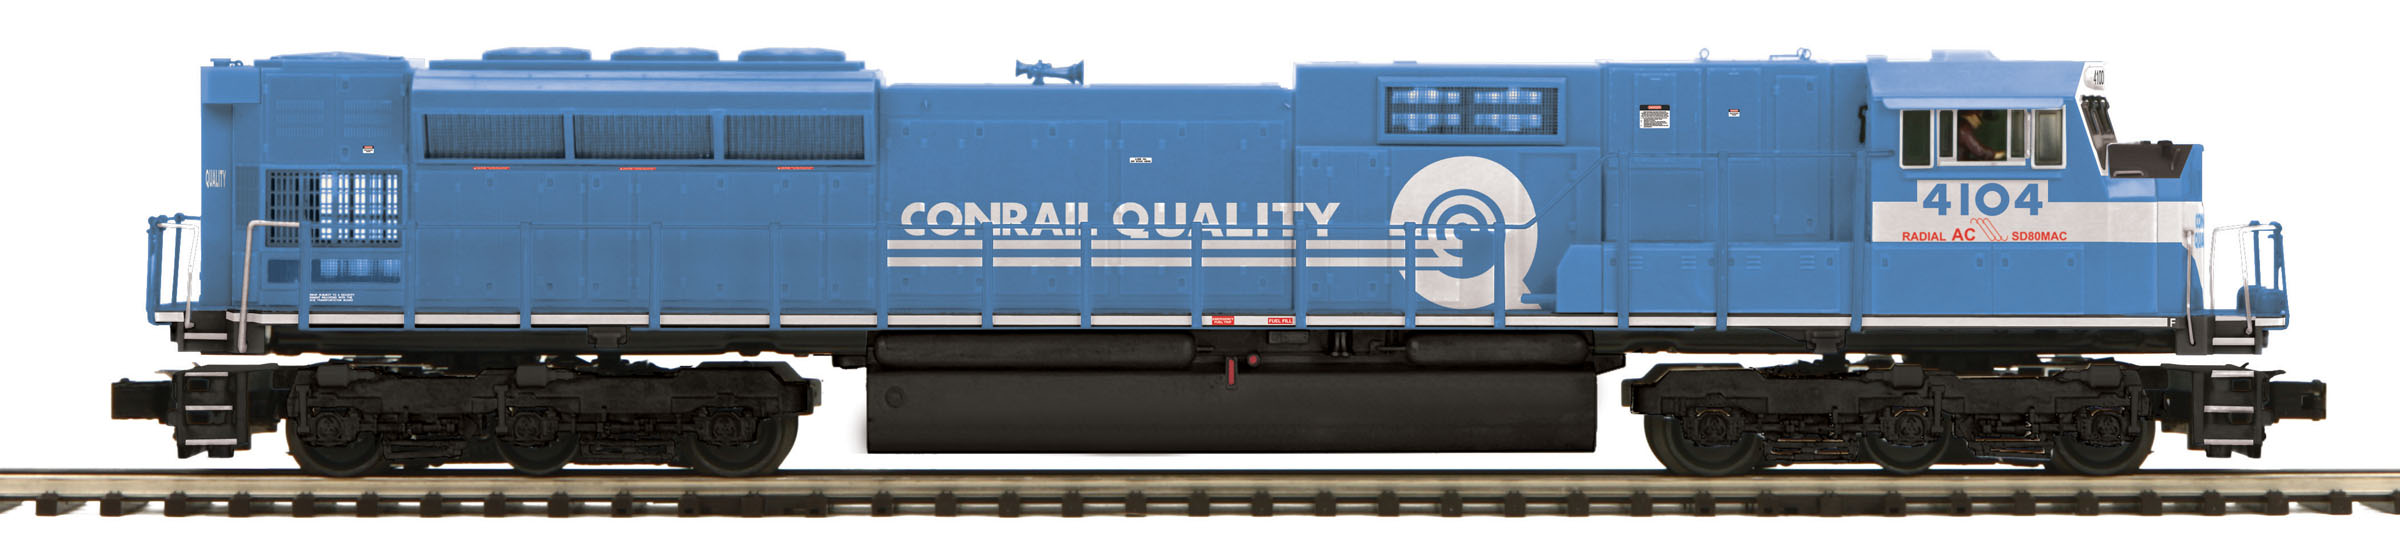 MTH 2015 One Gauge Catalog - Page 2 - General Discussion - G Scale 